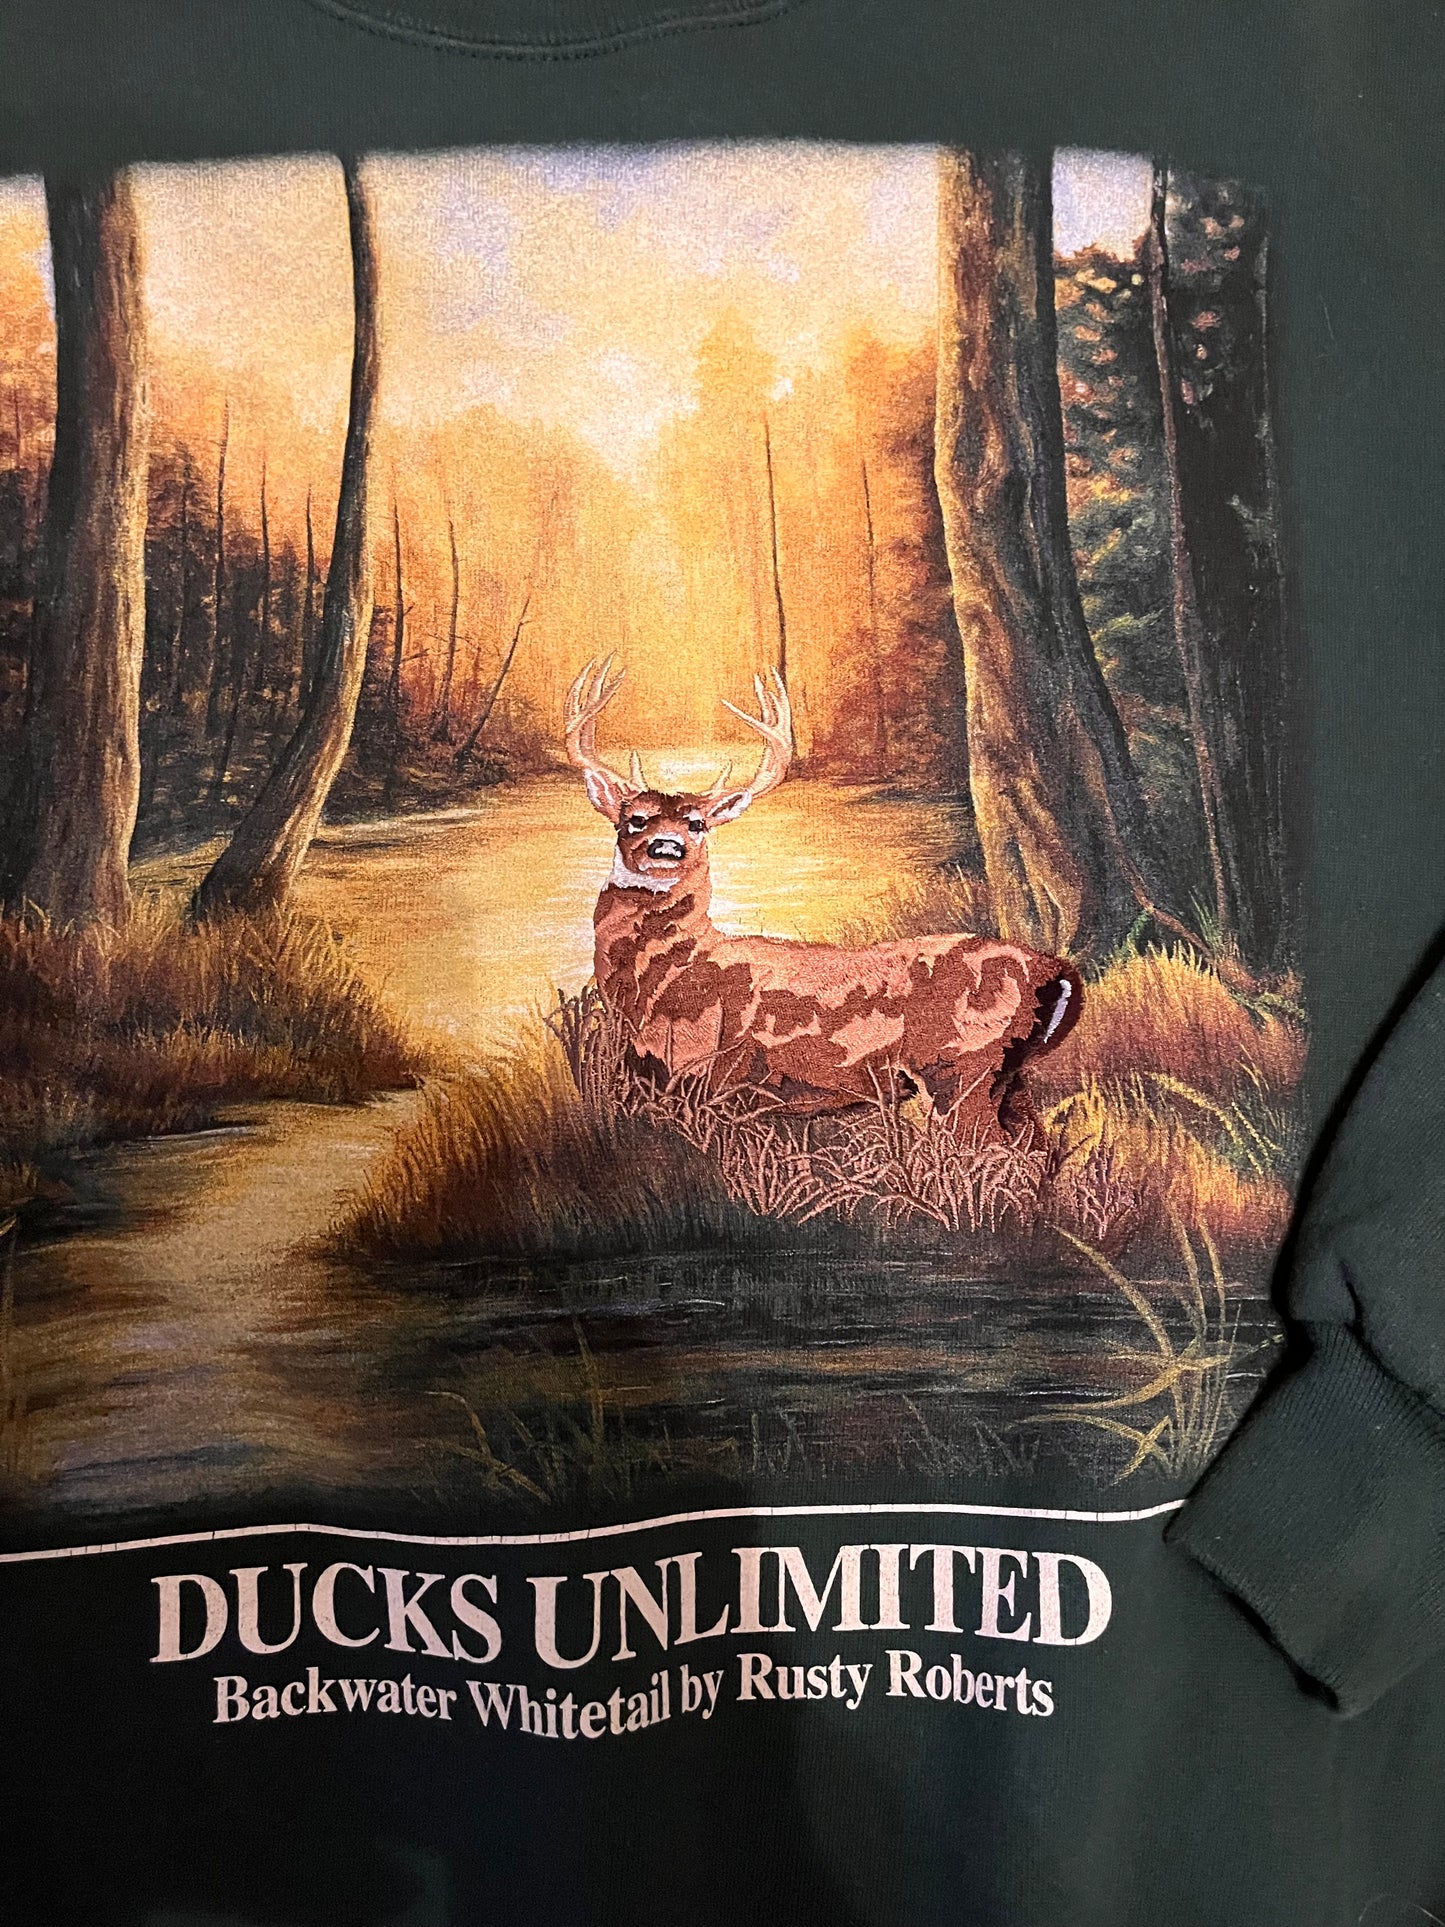 Ducks Unlimited “Backwater Whitetail XL”